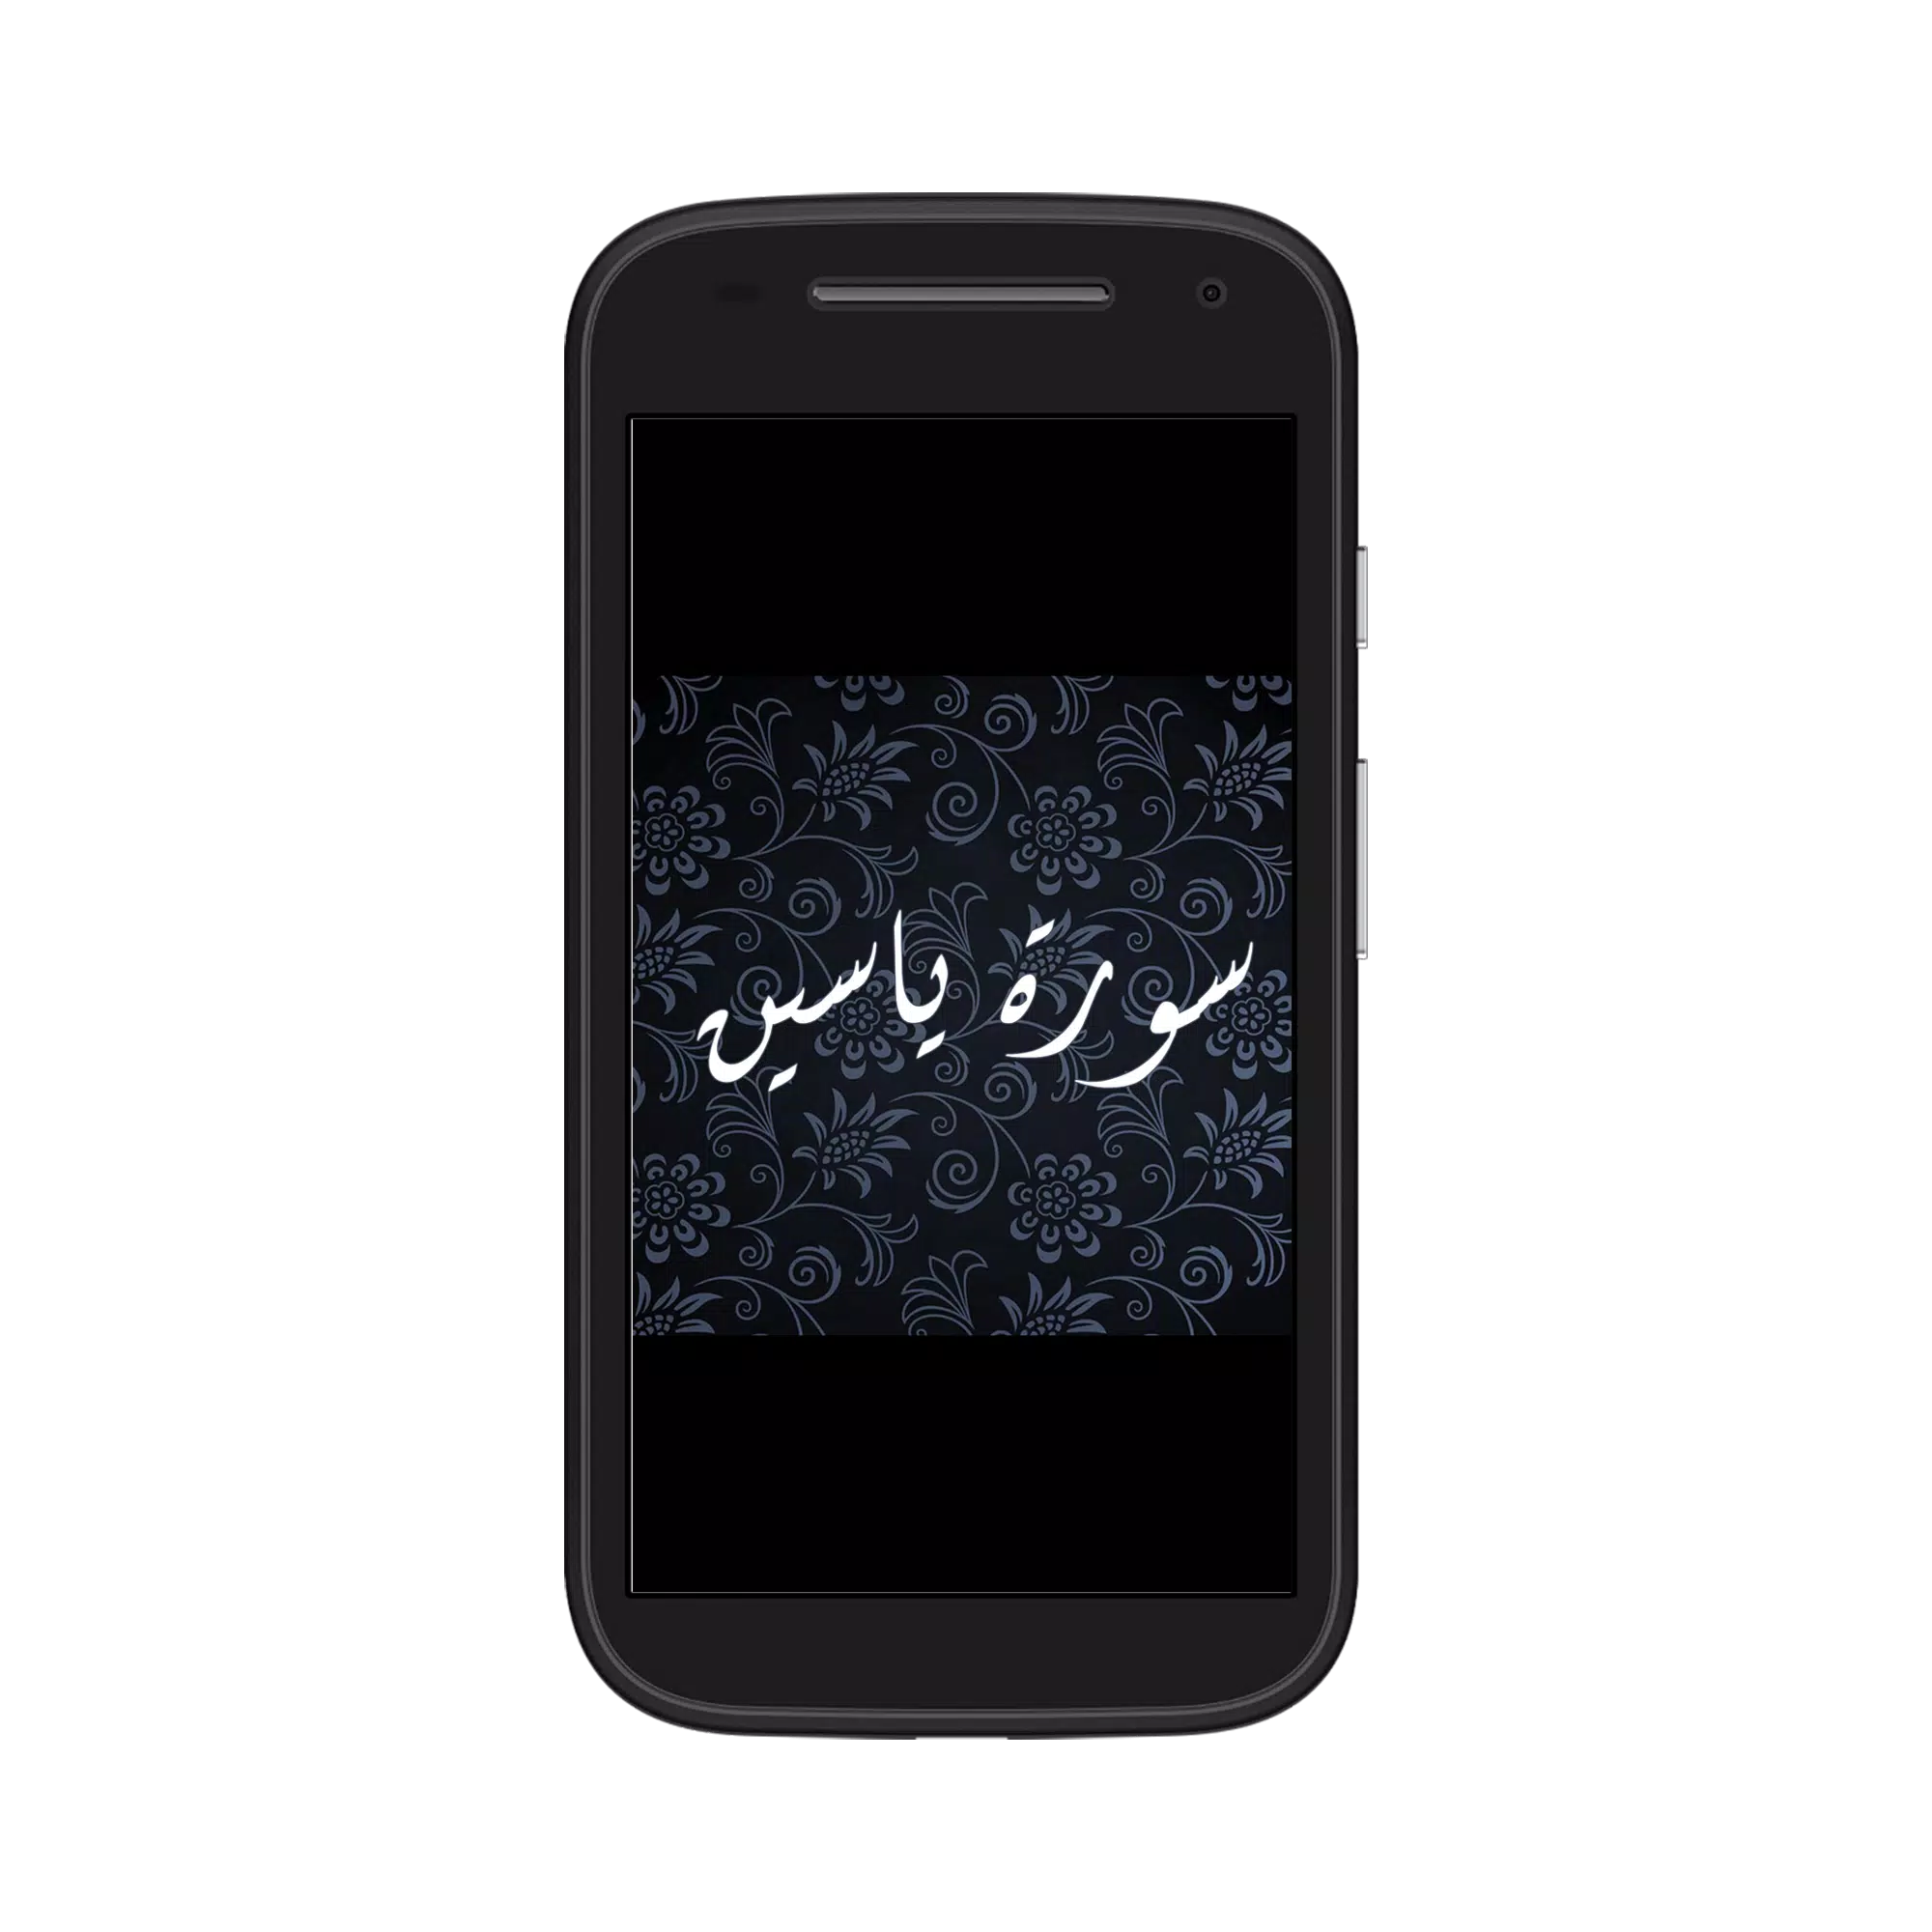 Sourat Yassin Coran mp3 APK for Android Download